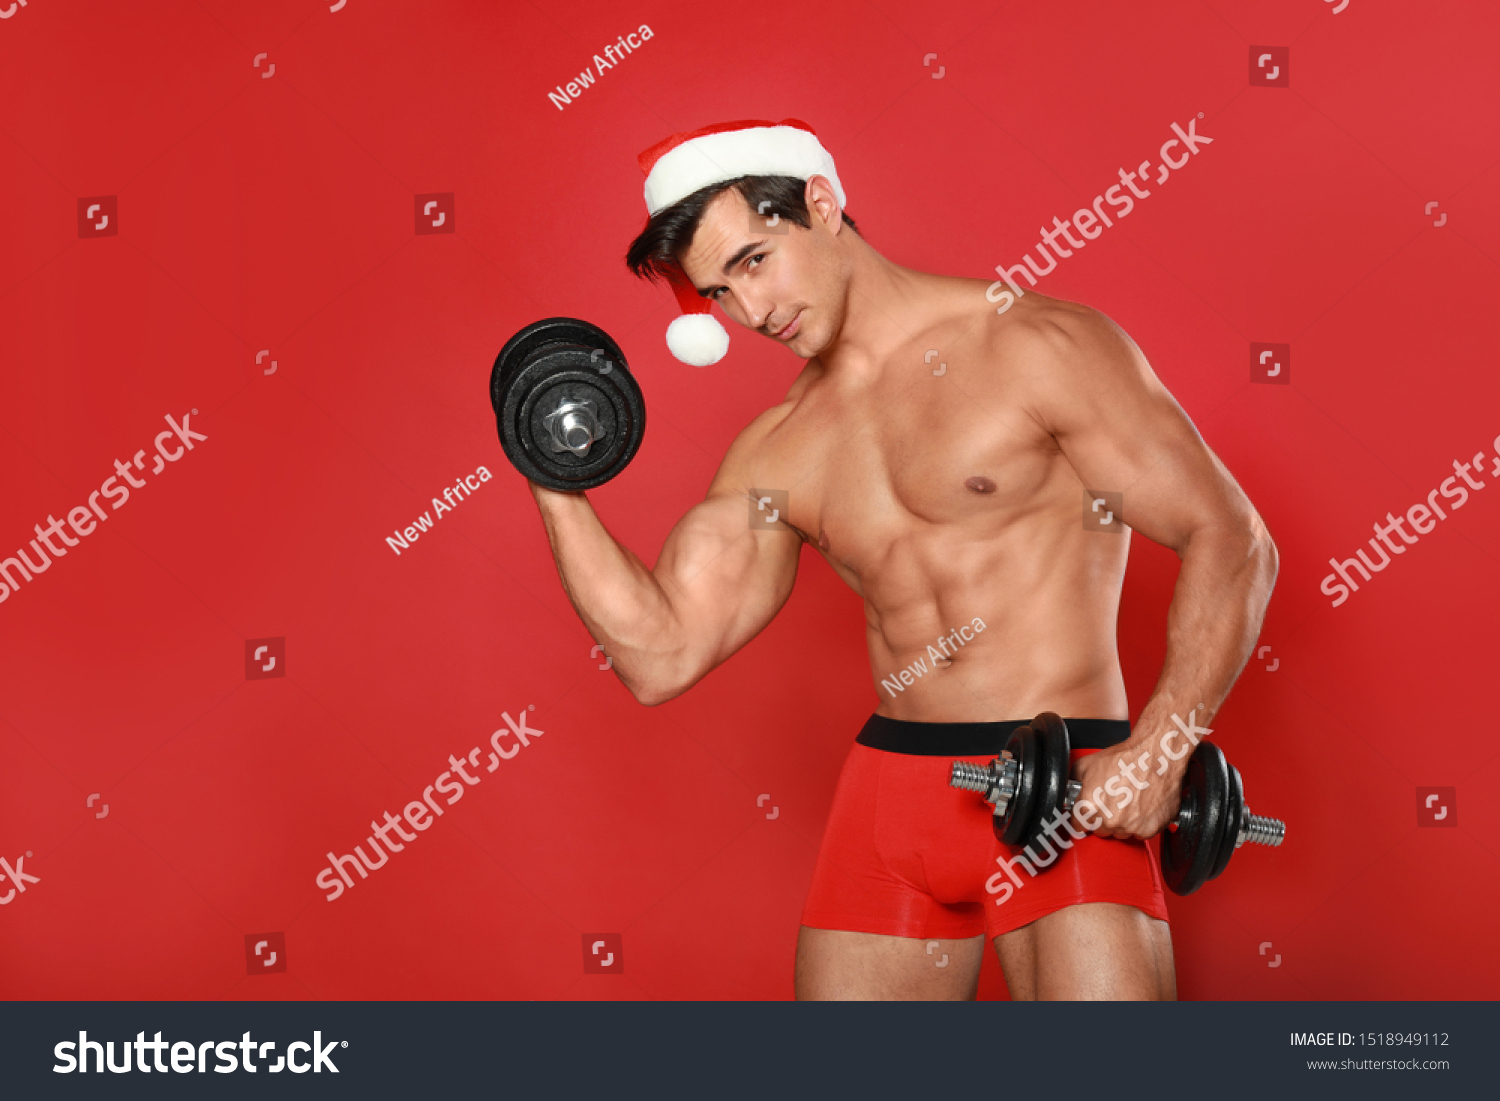 Sexy Shirtless Santa Claus Dumbbells On Stock Photo Shutterstock